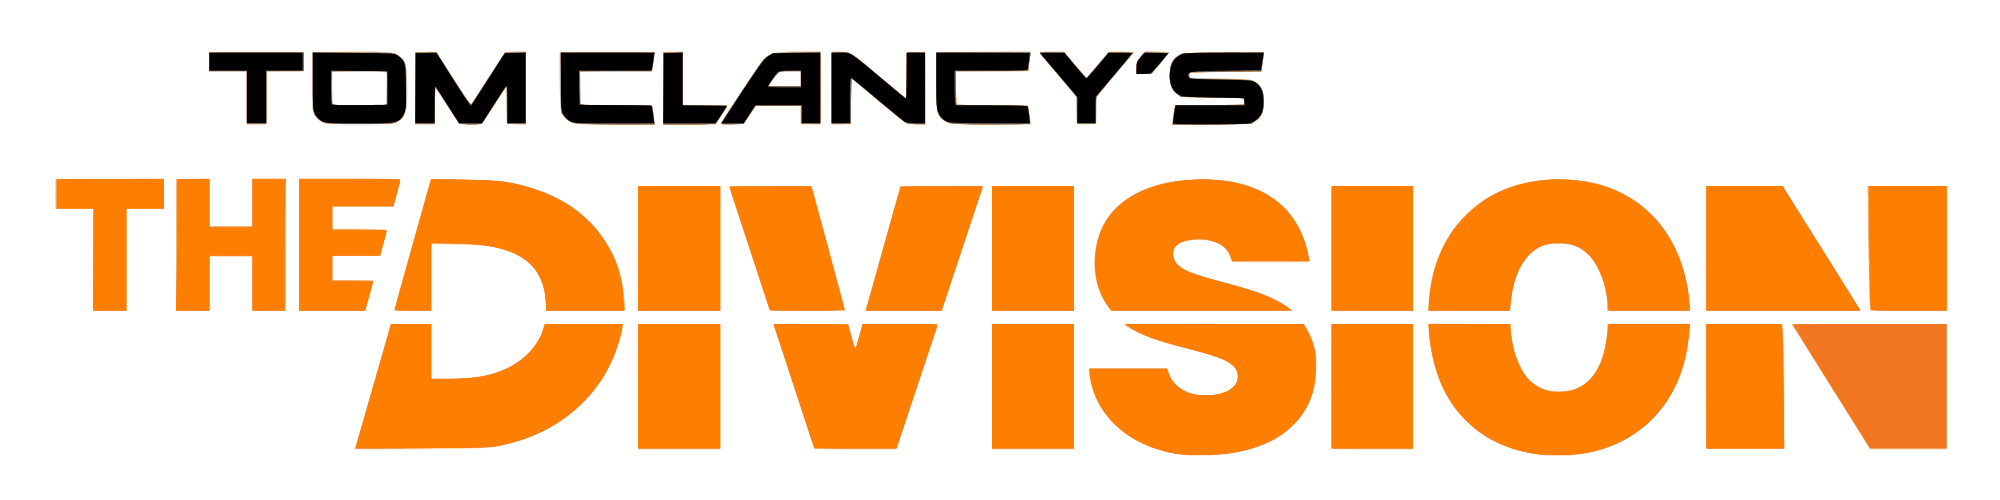 Division Logo - File:Tom Clancy's The Division – Game logo.svg - Wikimedia Commons